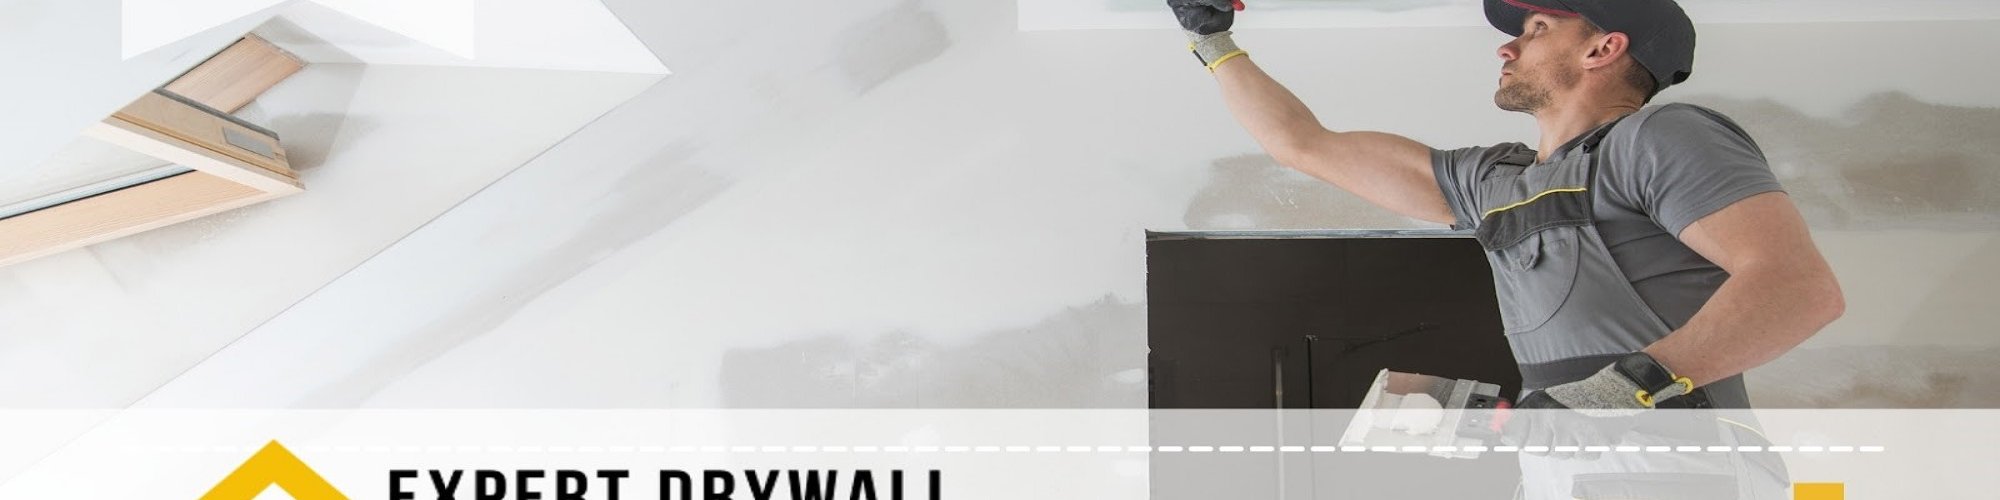 Expert Drywall Vancouver